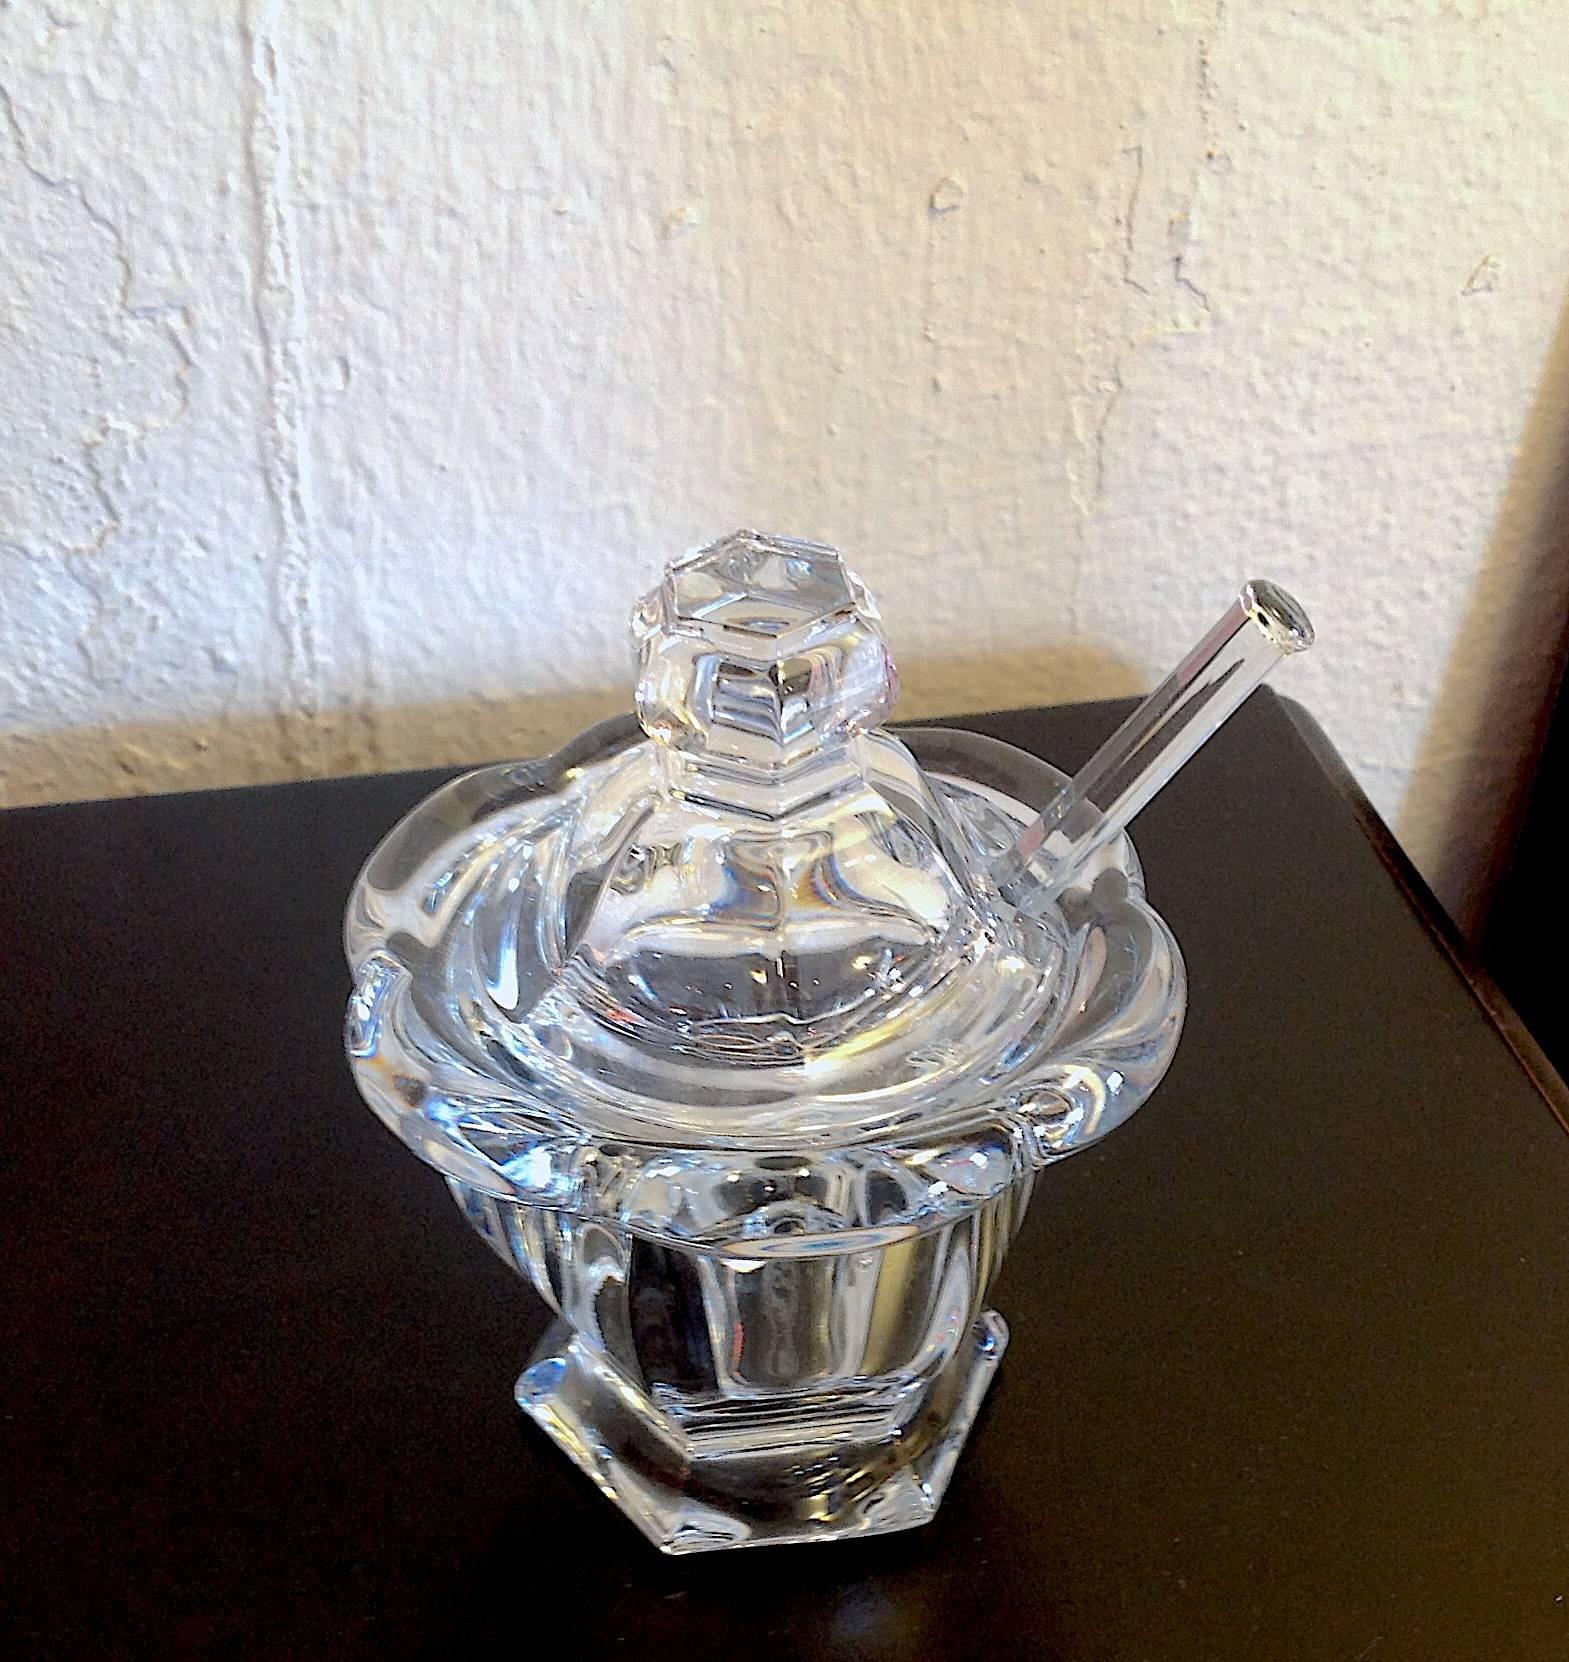 Vintage Baccarat crystal mustard/honey jar in Missouri Pattern from Harcourt Collection, with lid and slot for cut crystal spoon, circa 1930s, acid etched Baccarat stamp on bottom. Stands 4 1/2